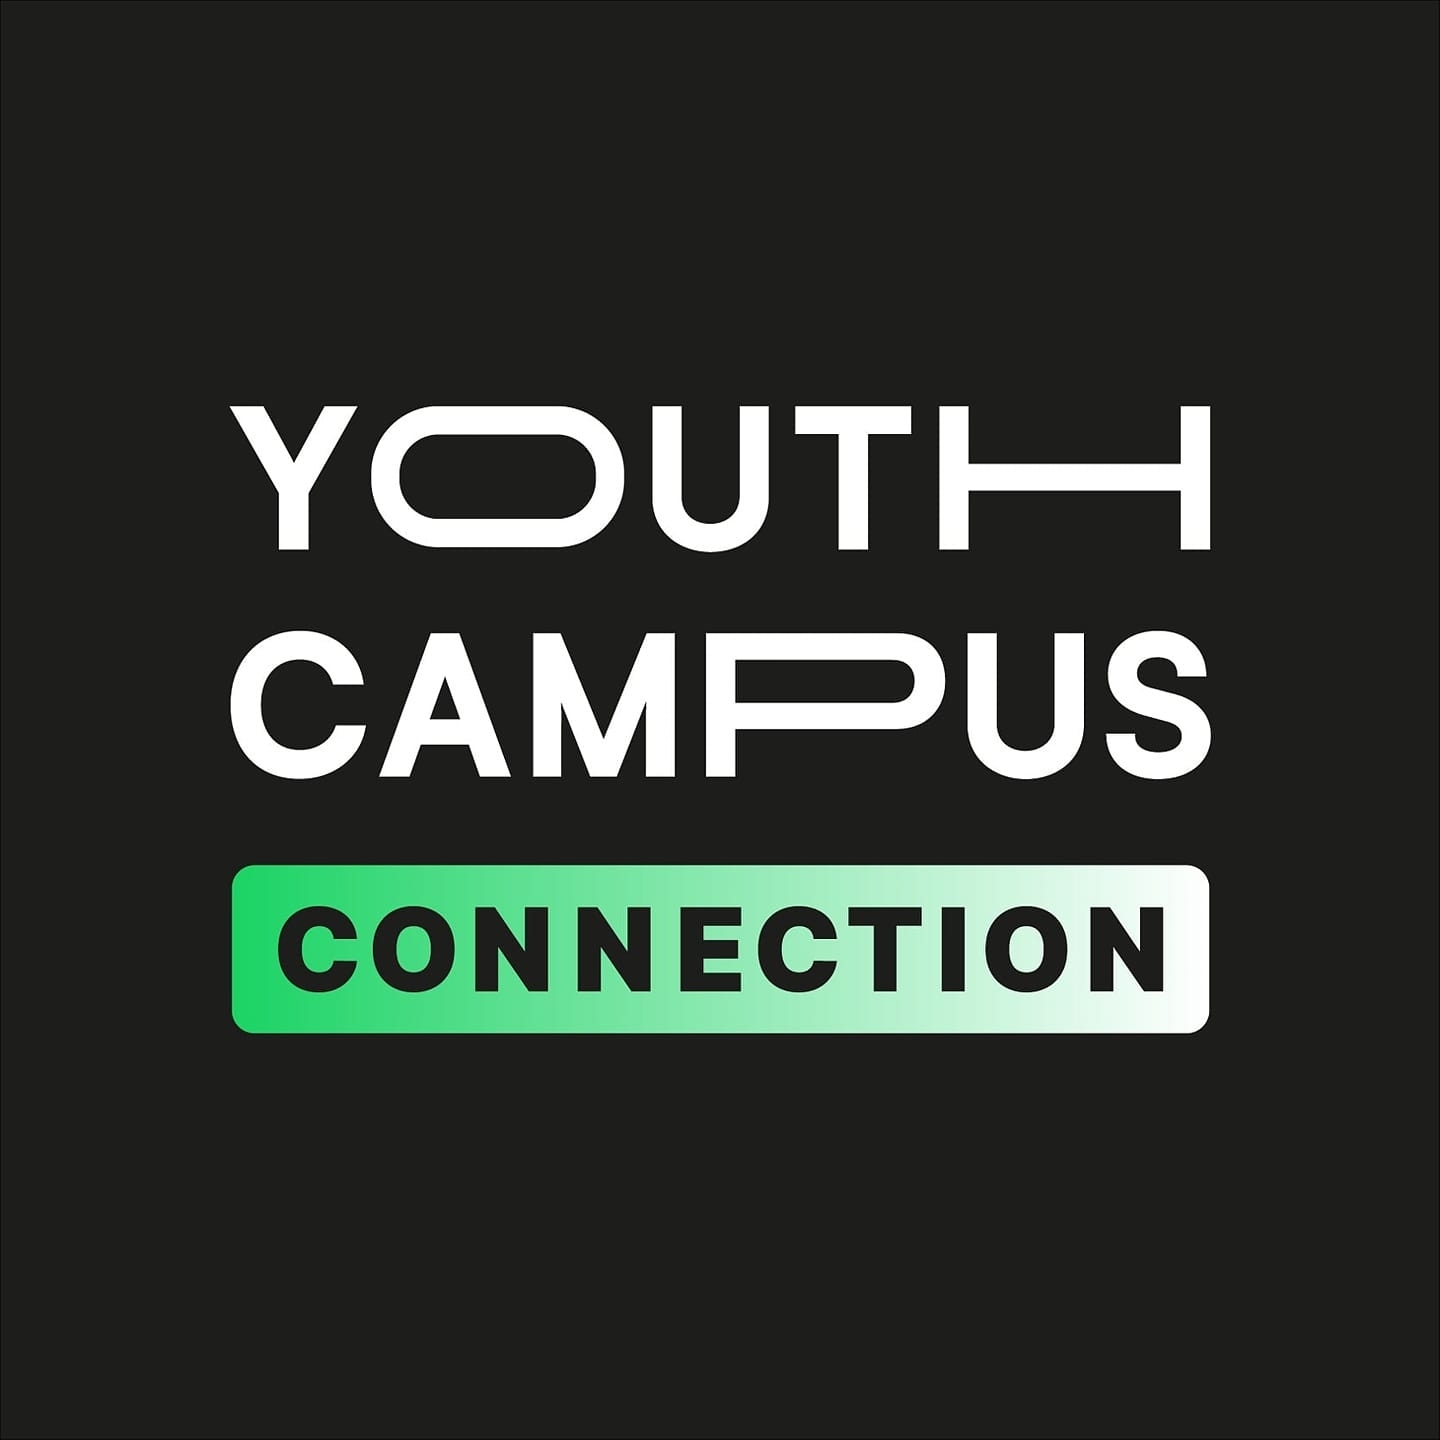 Youth Campus Connection logo